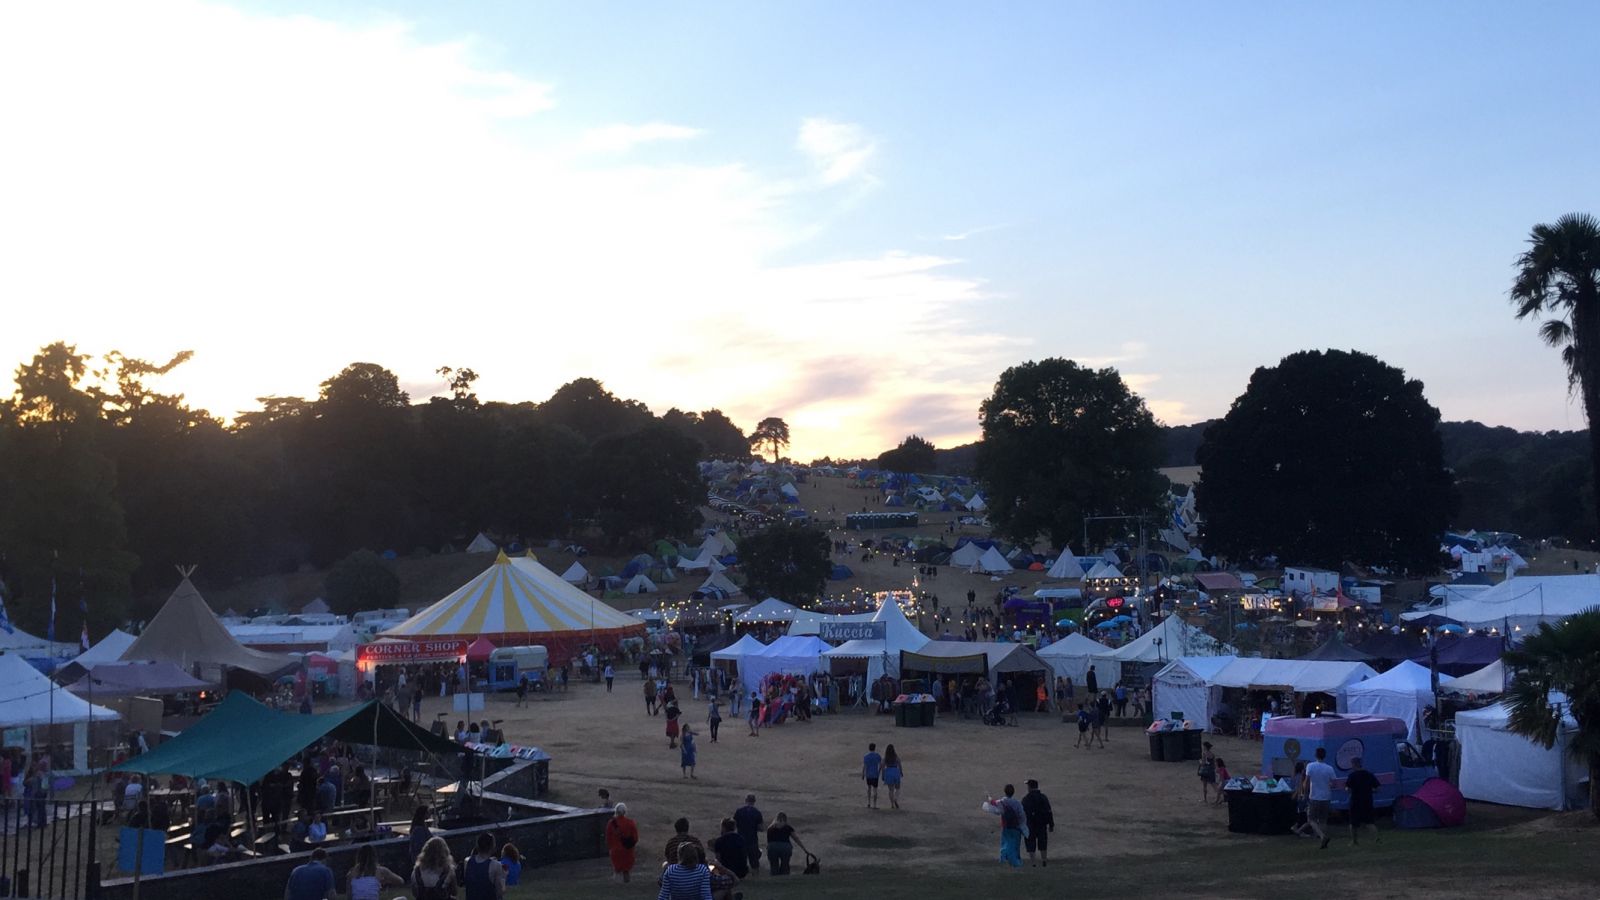 The sun goes down over the beautiful Port Eliot site in St Germans, Cornwall.